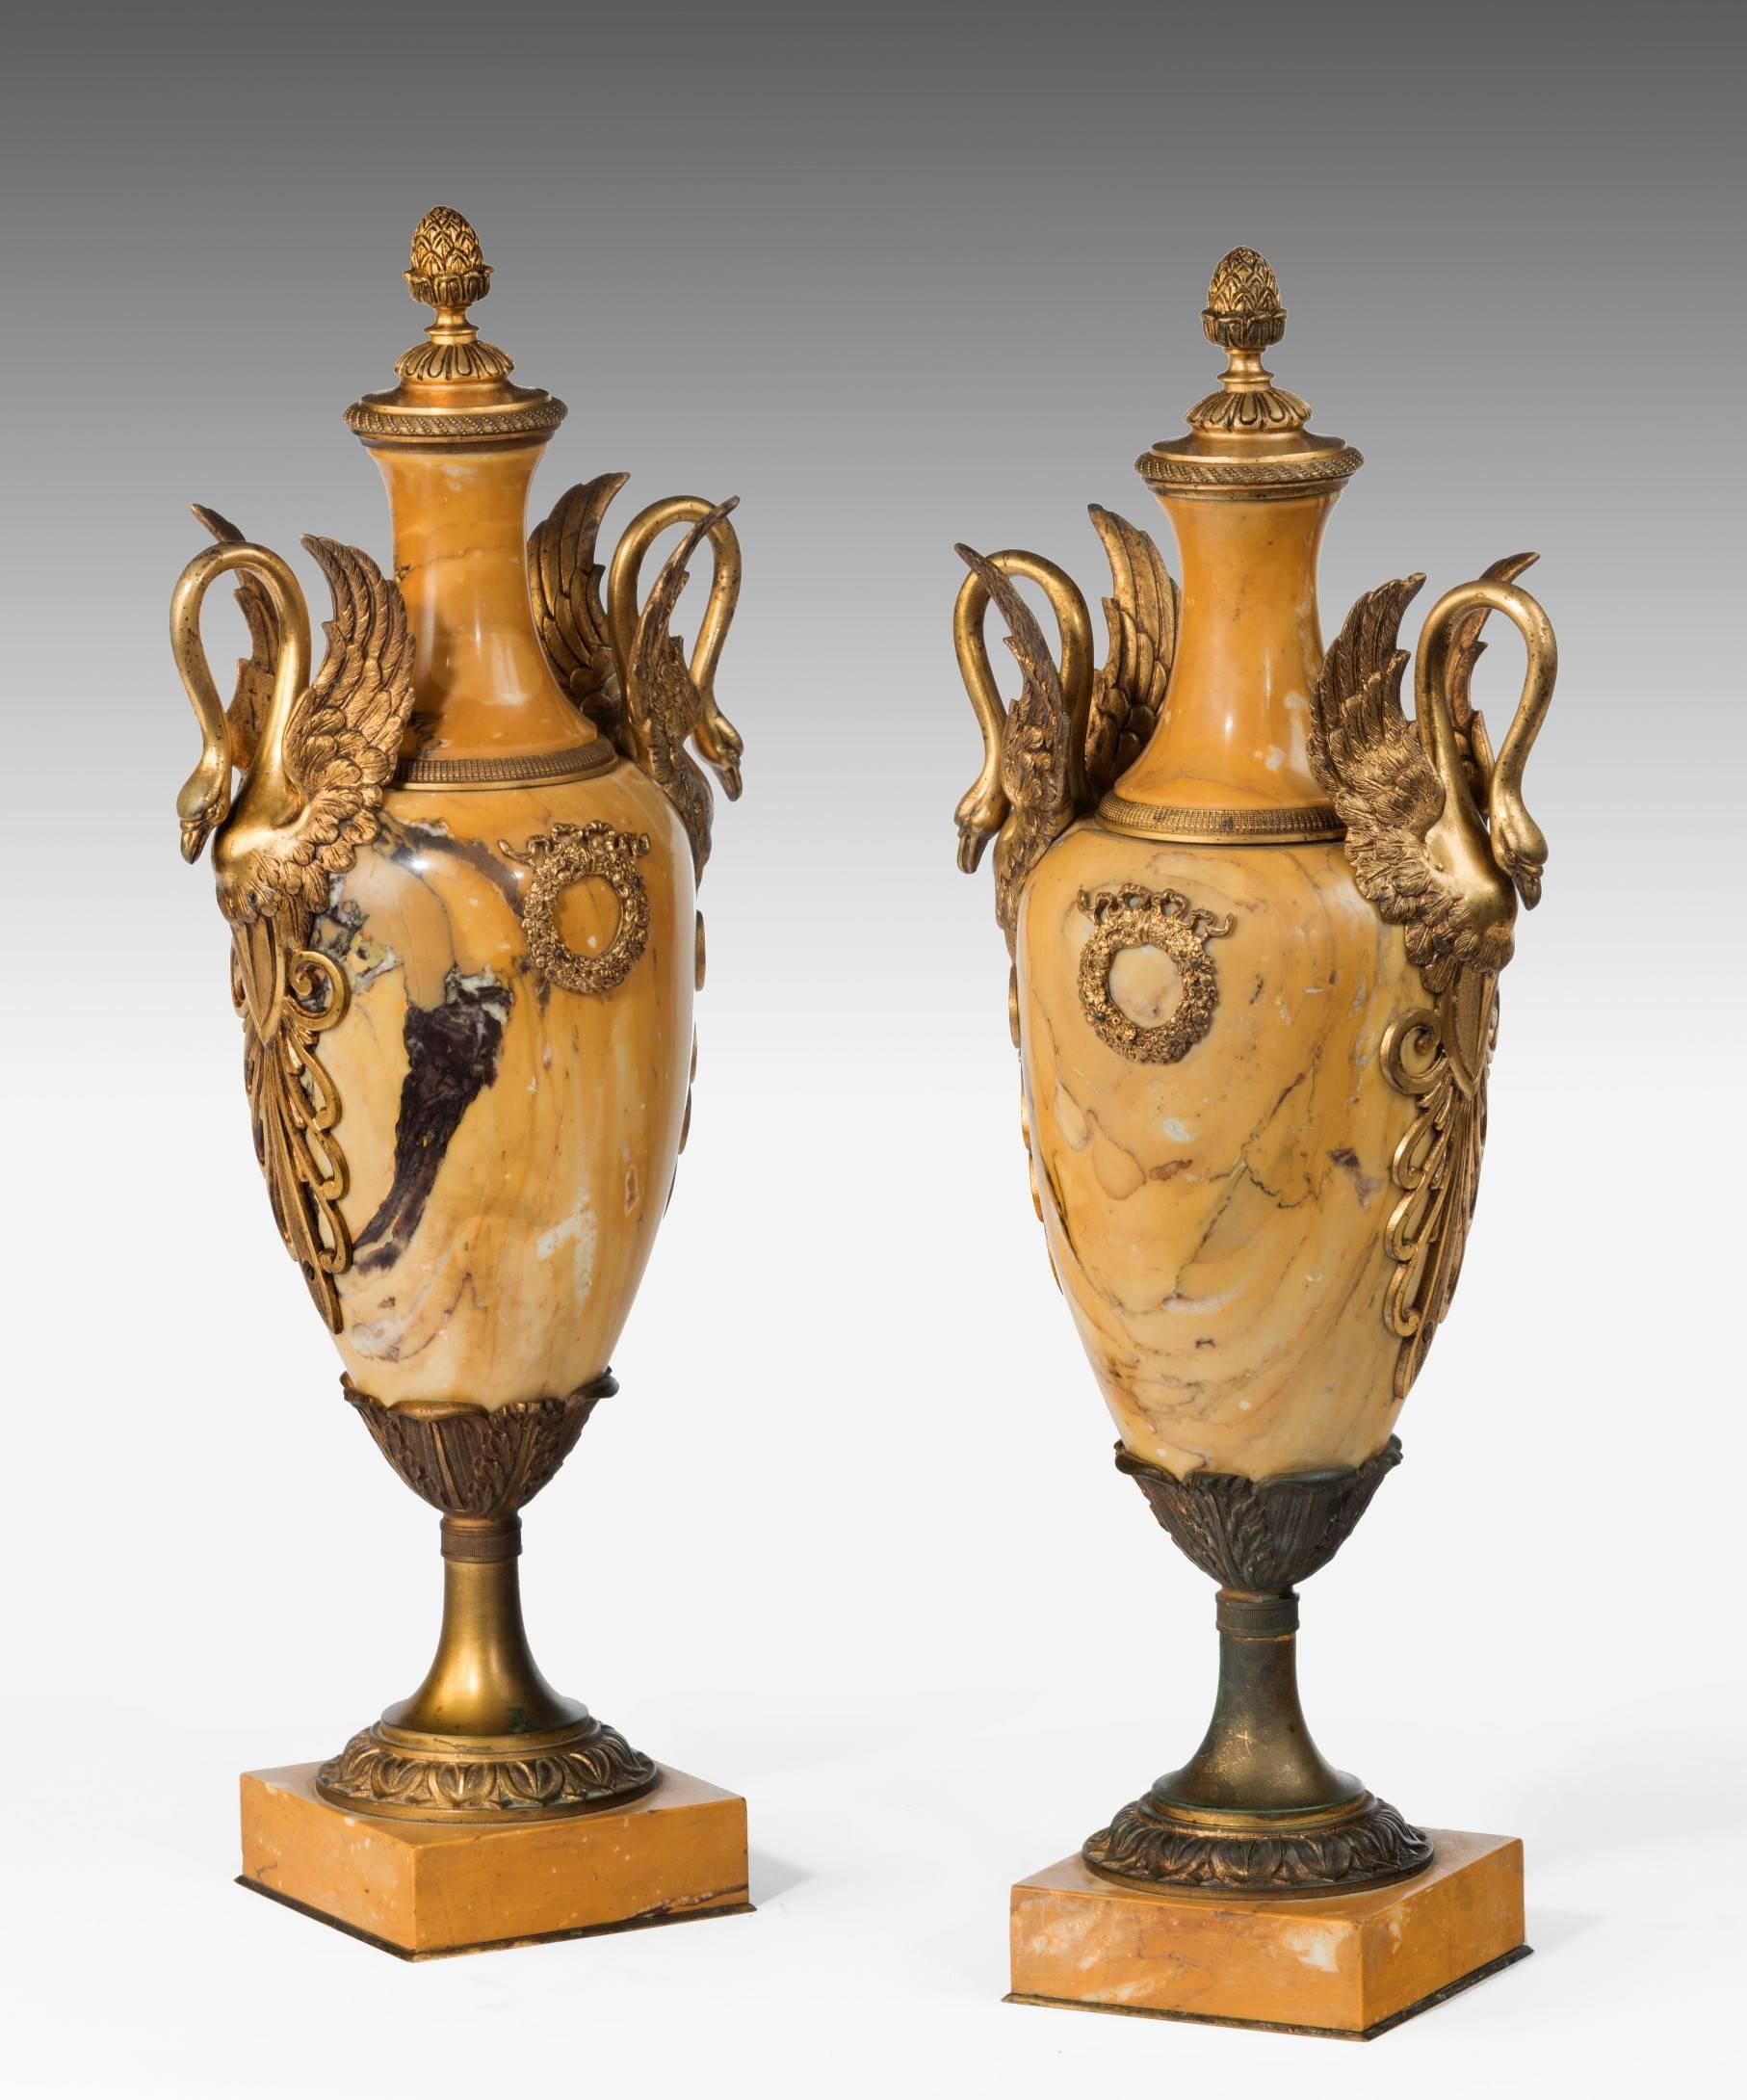 An elegant pair of late 19th century marble and ormolu vases; the vase's siena marble body mounted in ormolu with an acorn finial and scrolling swans to either side of the body and a laurel wreath to the centre of the body; the vase raised on a